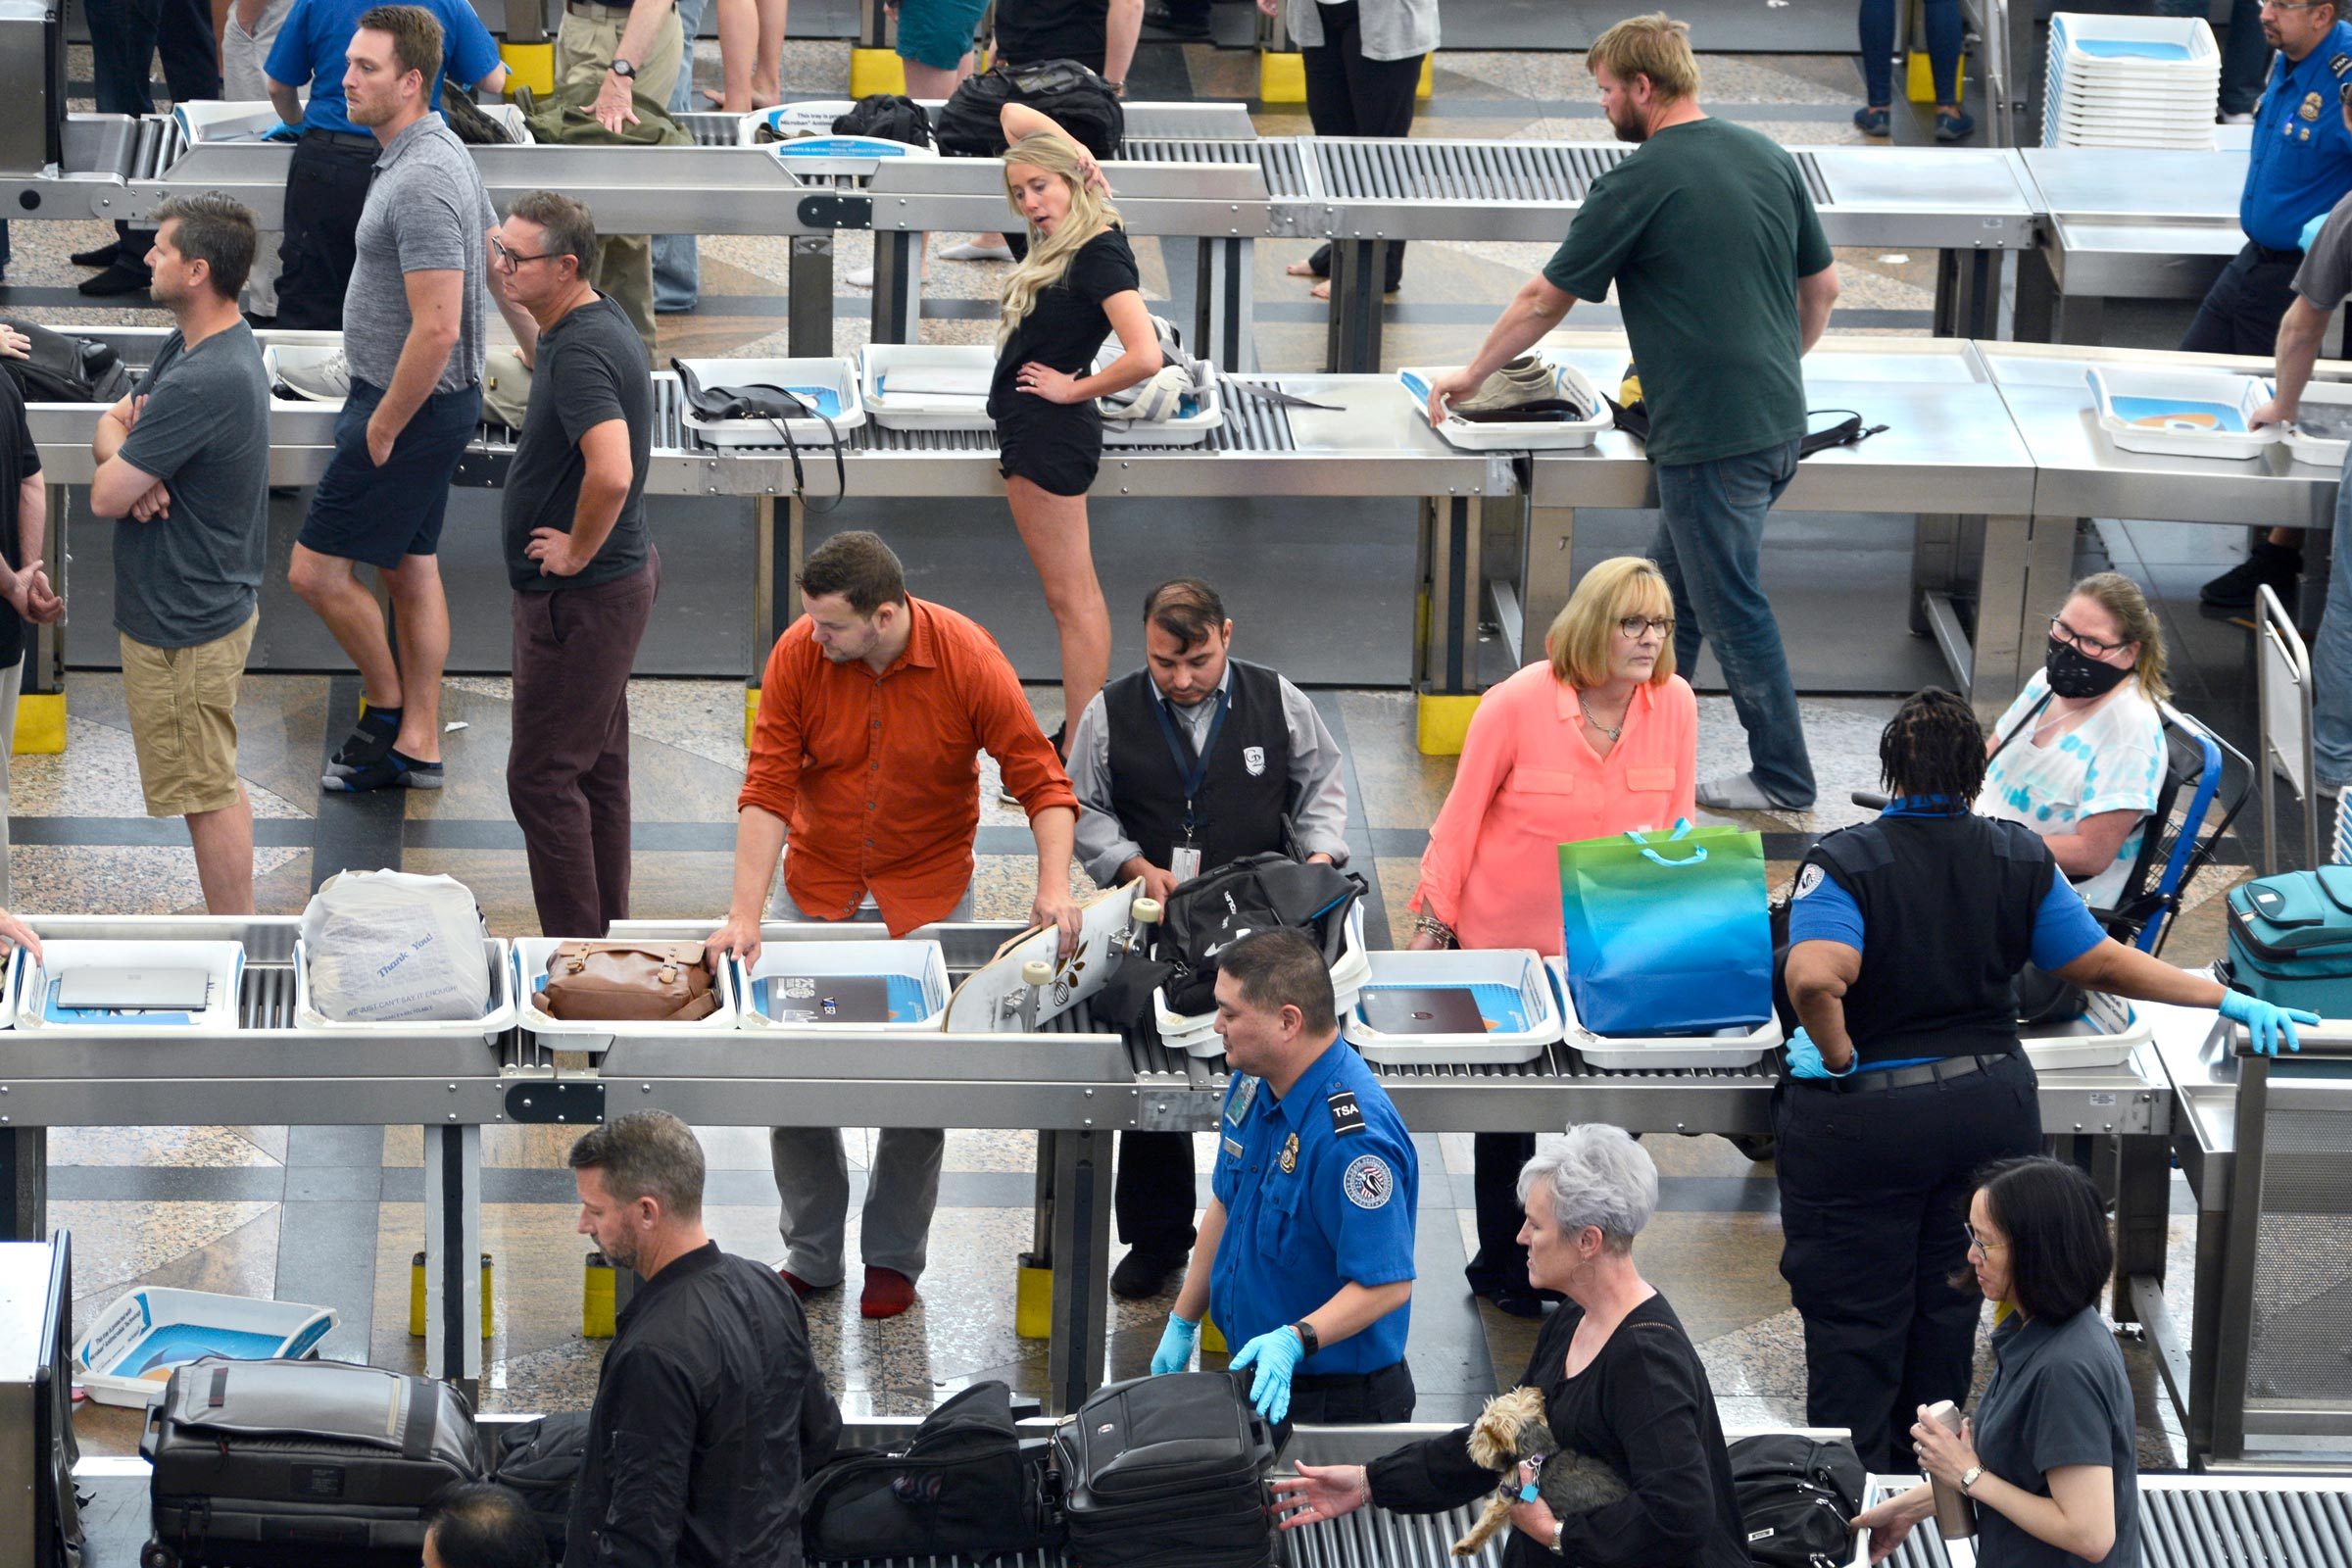 The 3 Most Common Airport Security Mistakes, According to a New Study